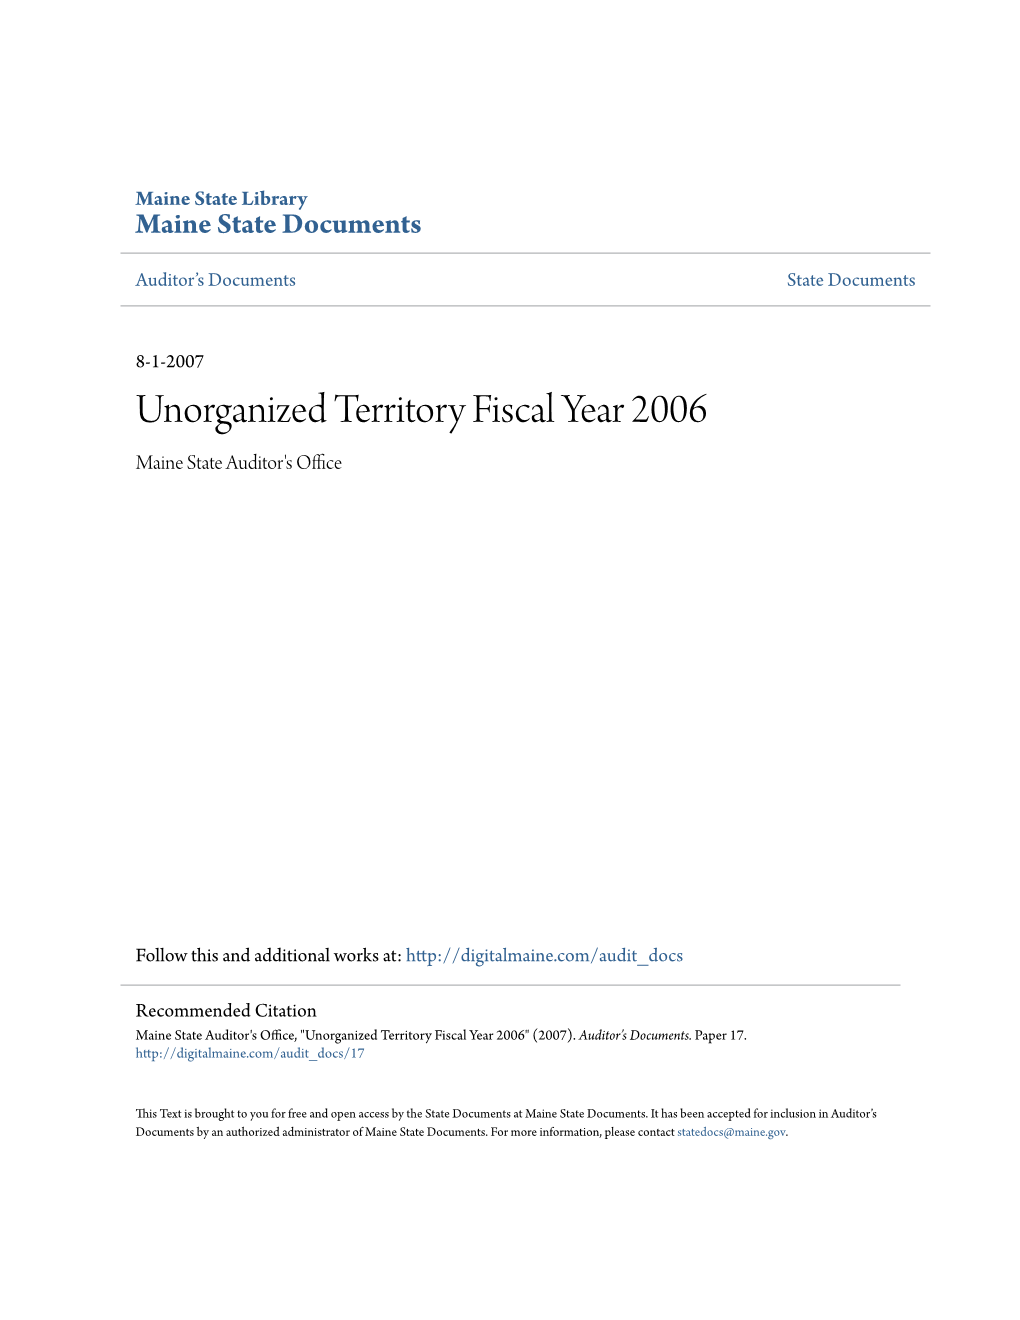 Unorganized Territory Fiscal Year 2006 Maine State Auditor's Office